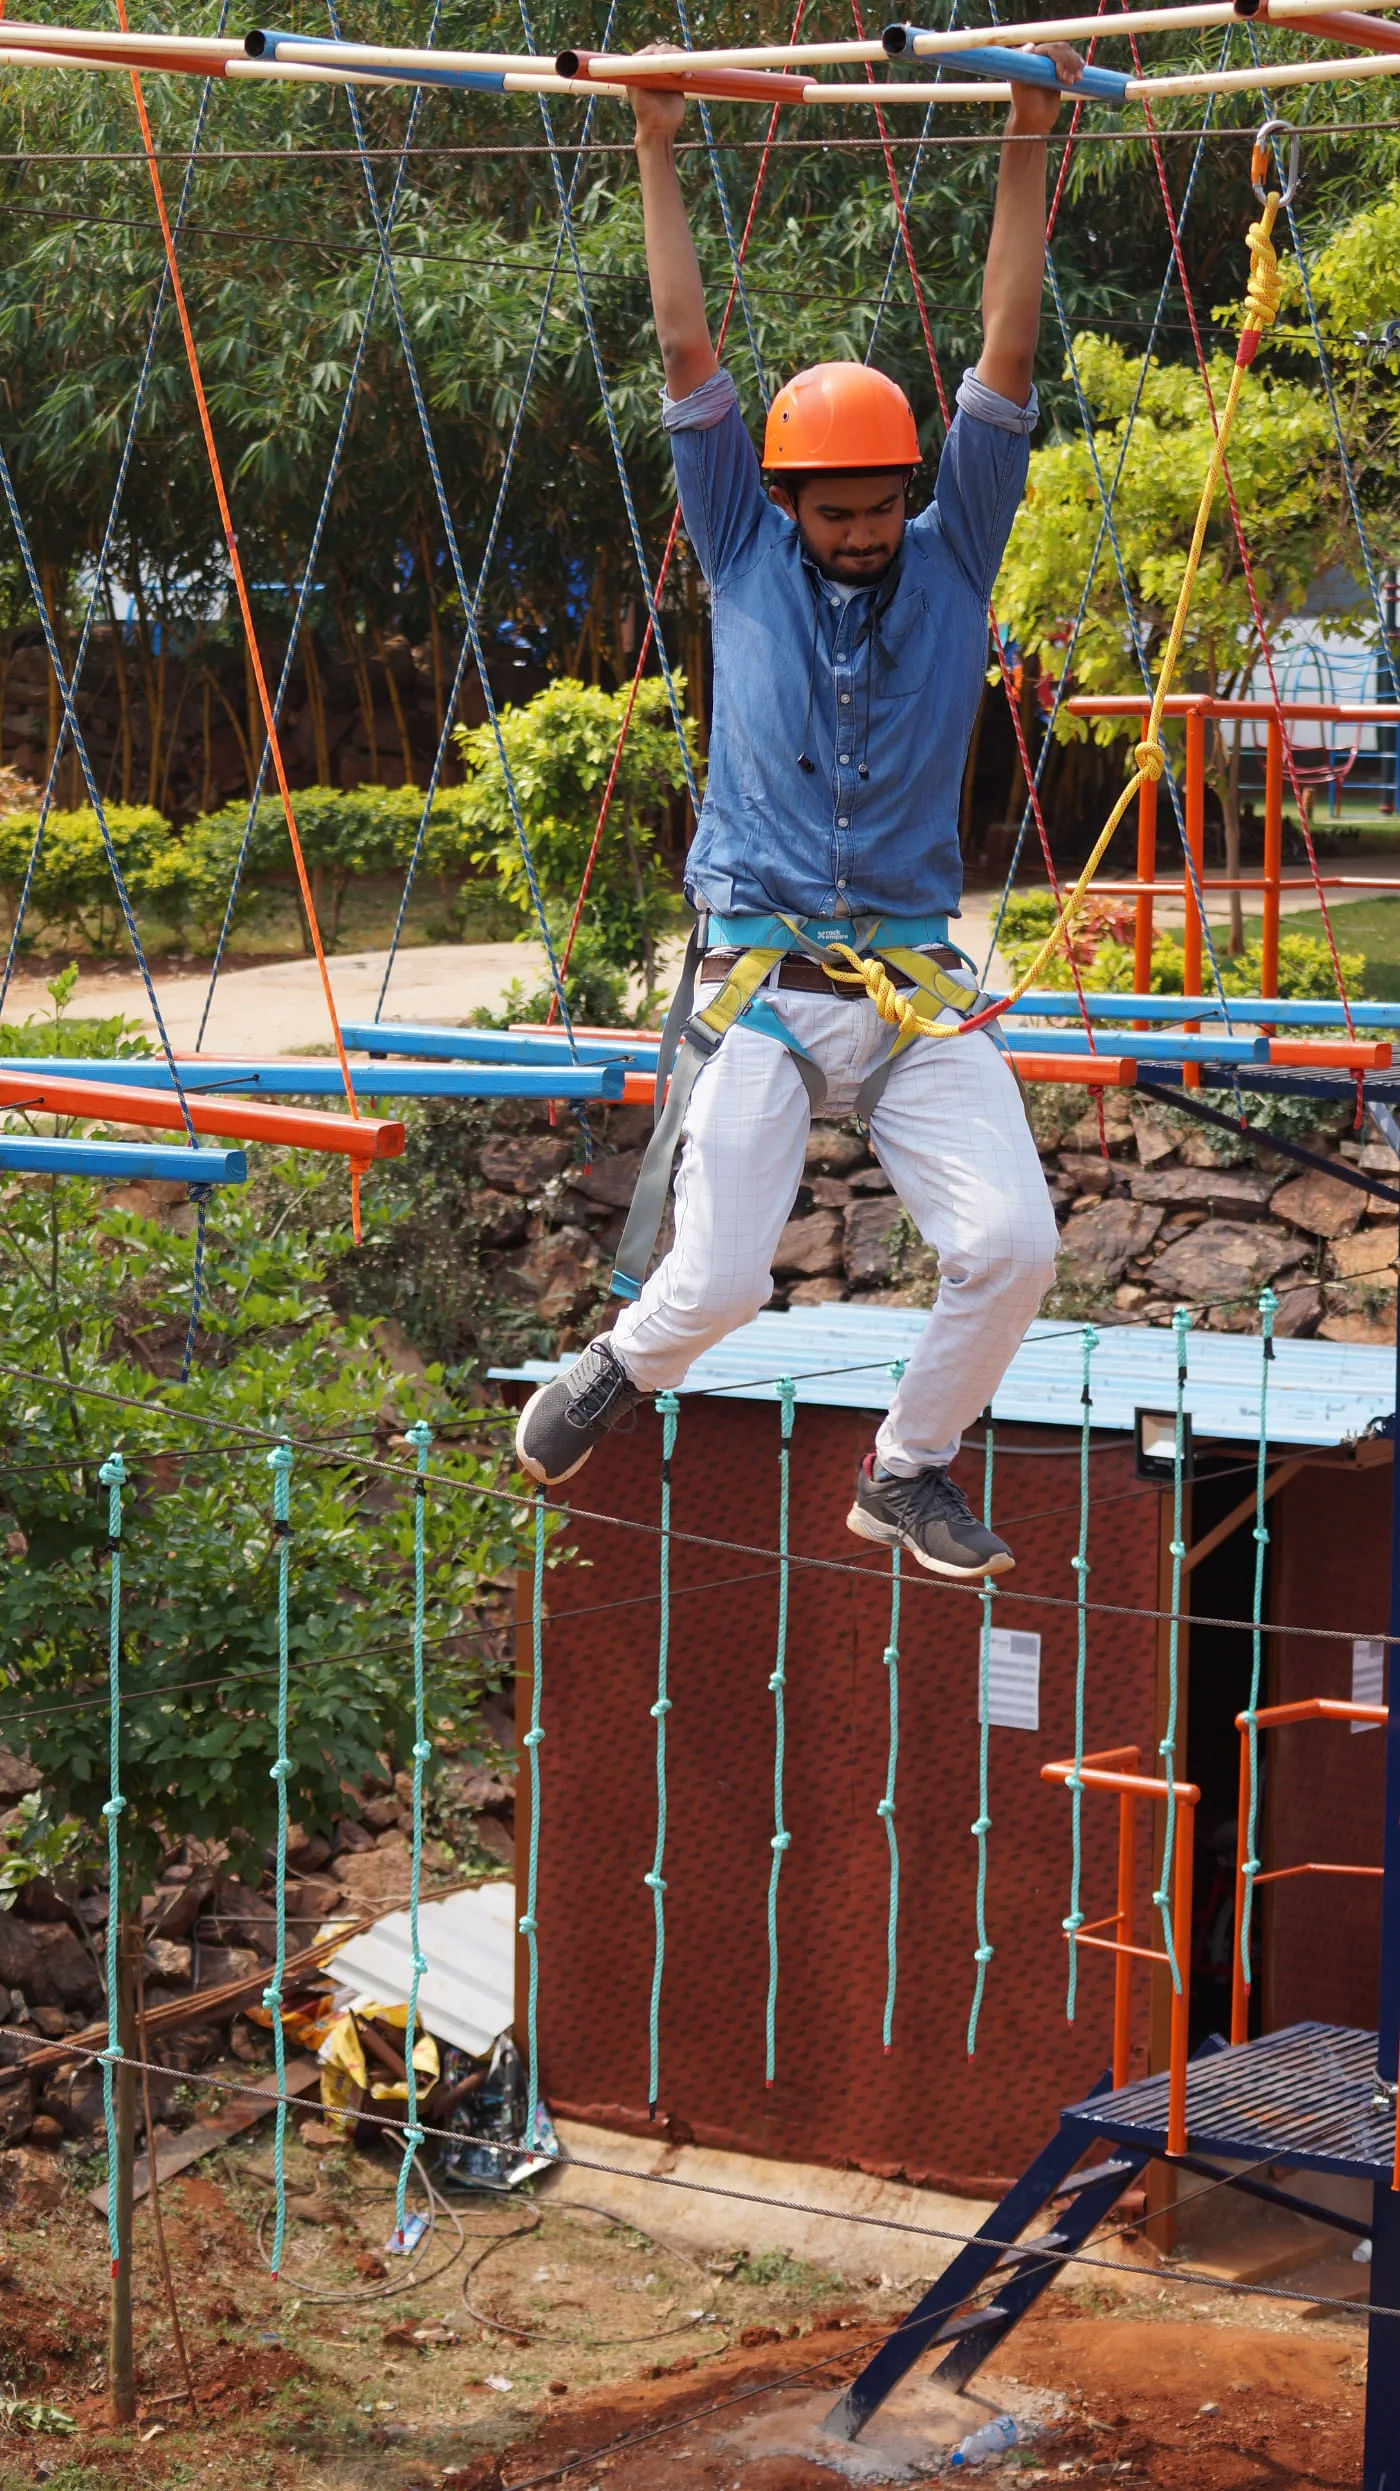 Day Out at an Adventure Resort near Bangalore!